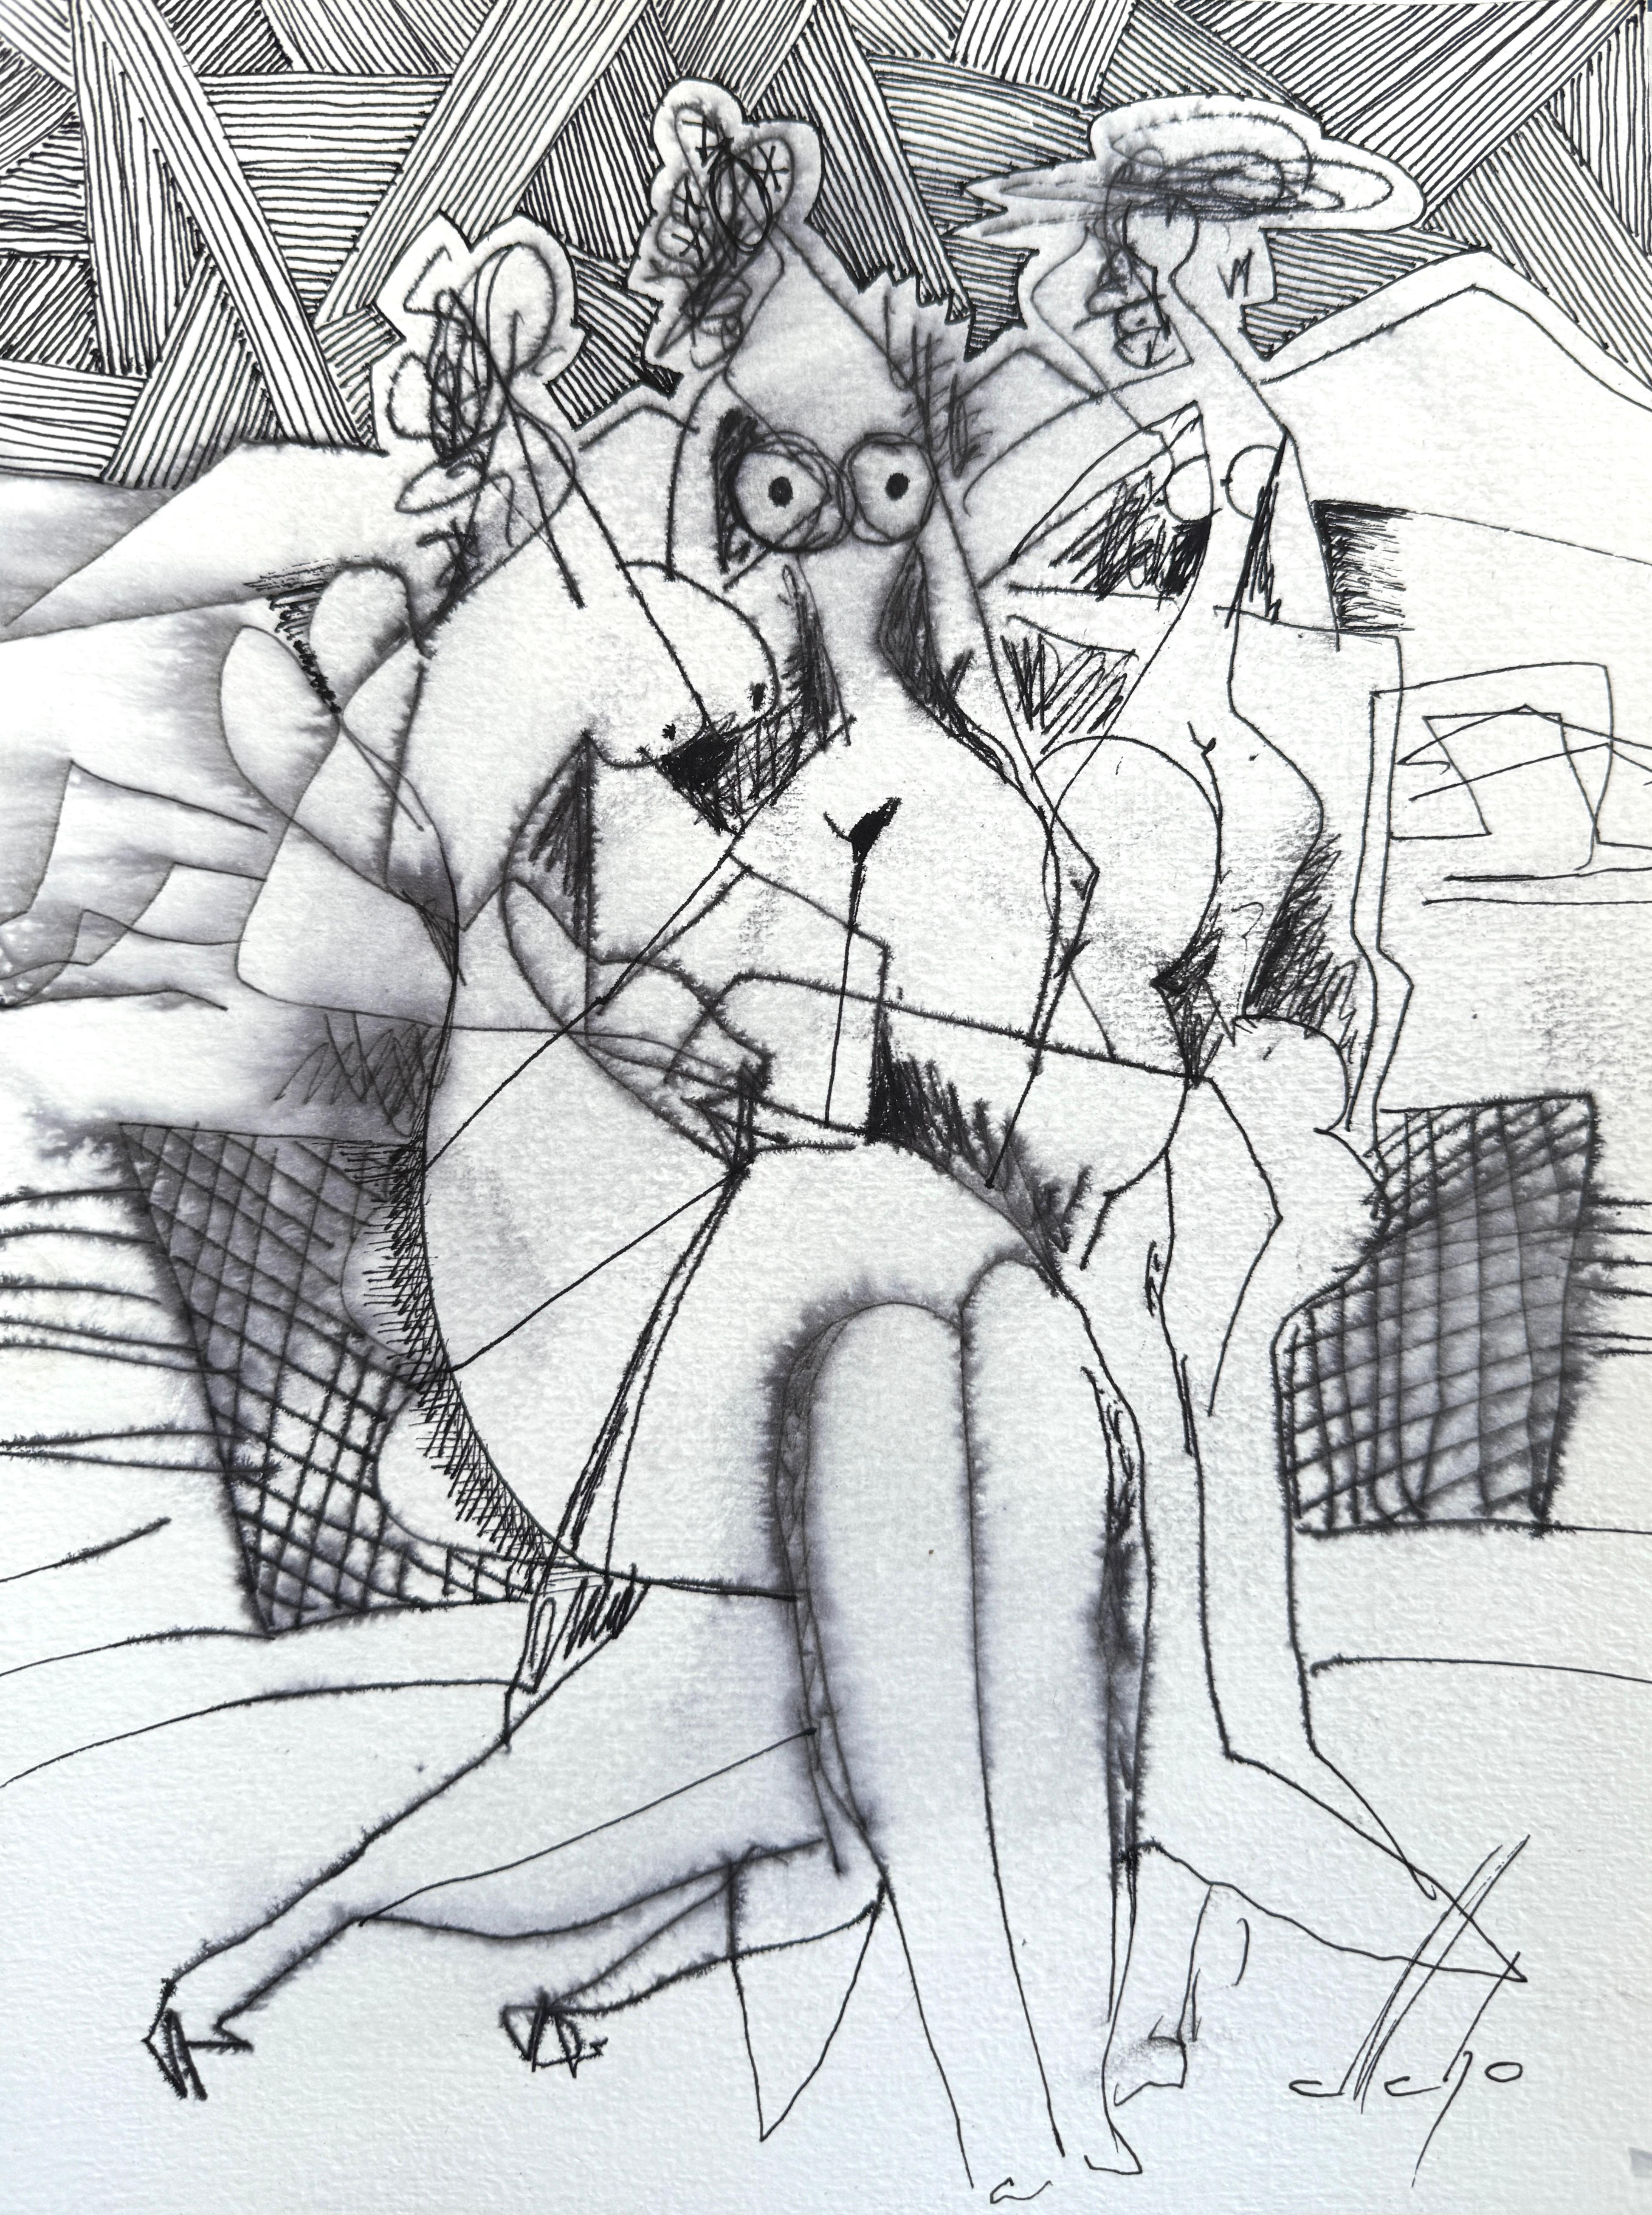 Mkrtich Sarkisyan (Mcho) Figurative Art - Lounge, Figurative Original Painting, Ink on Paper, Black and White 